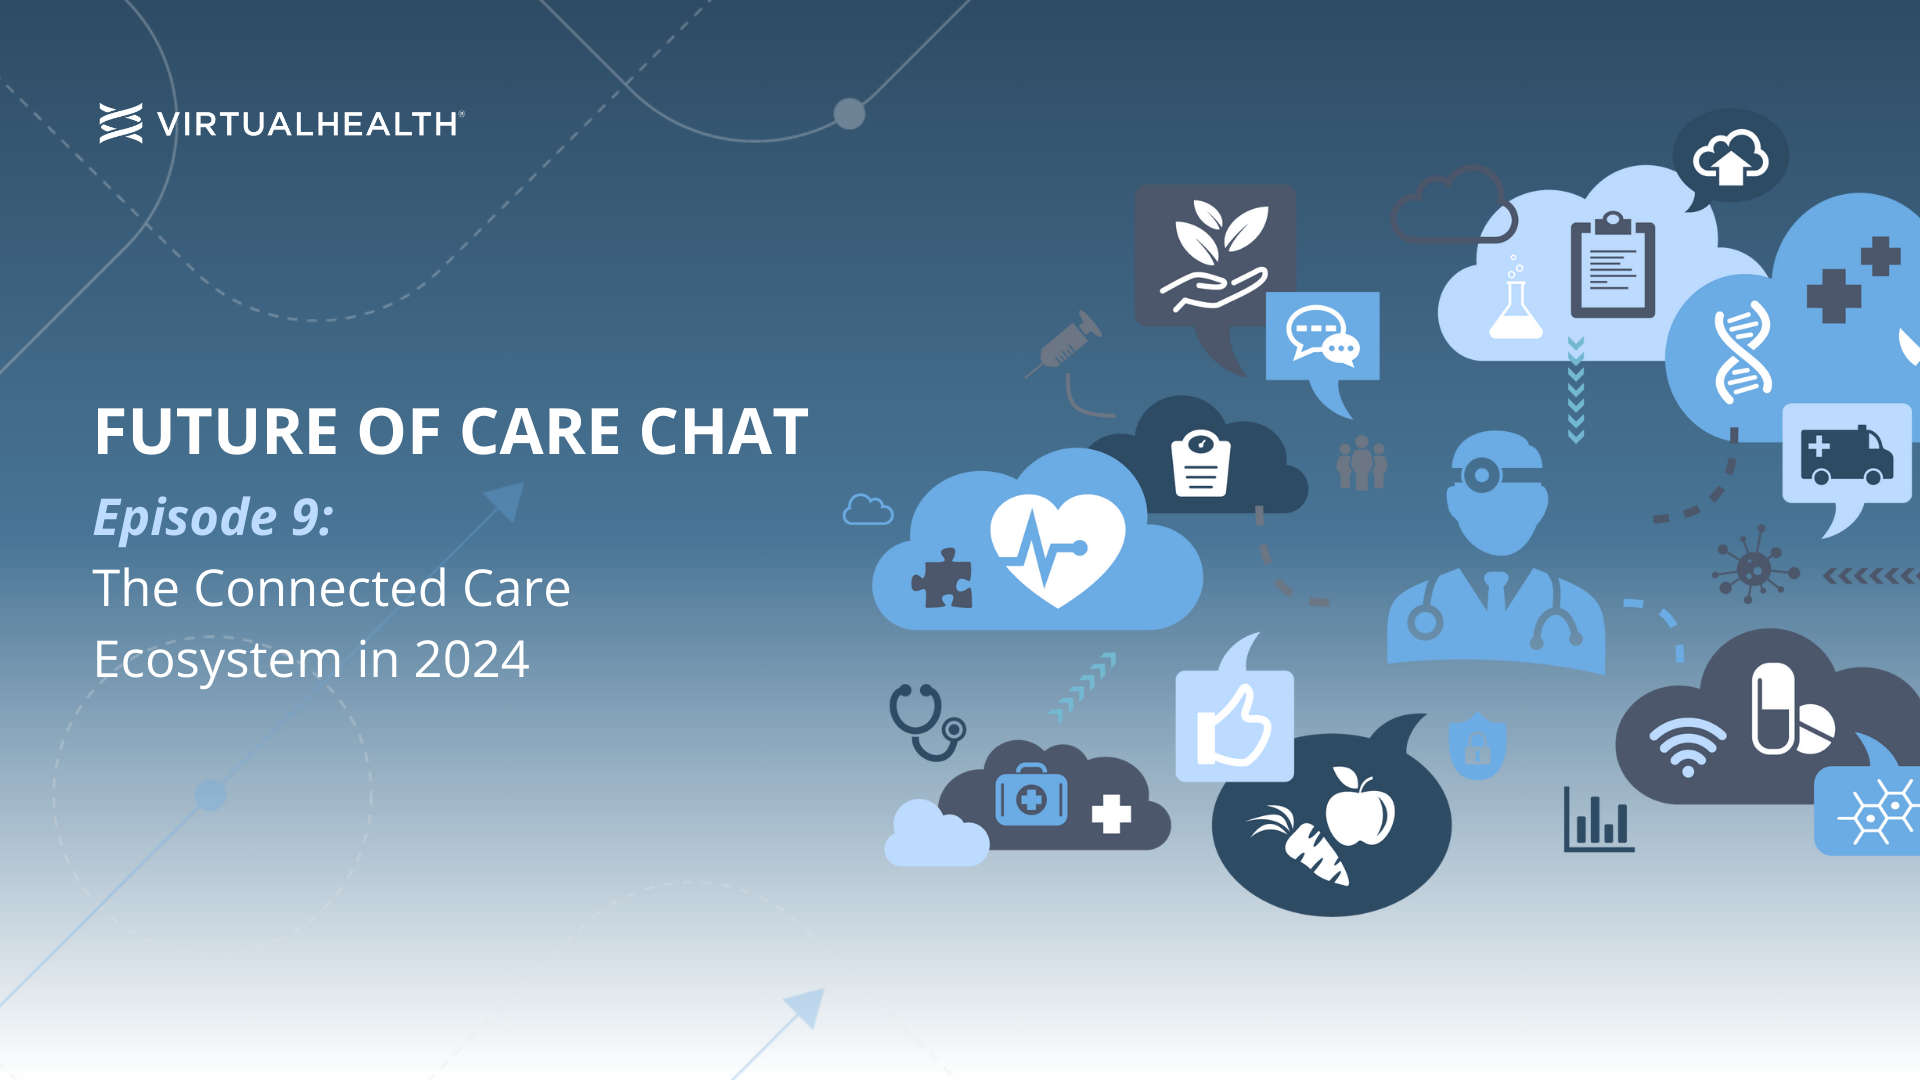 Connected care ecosystem in 2024